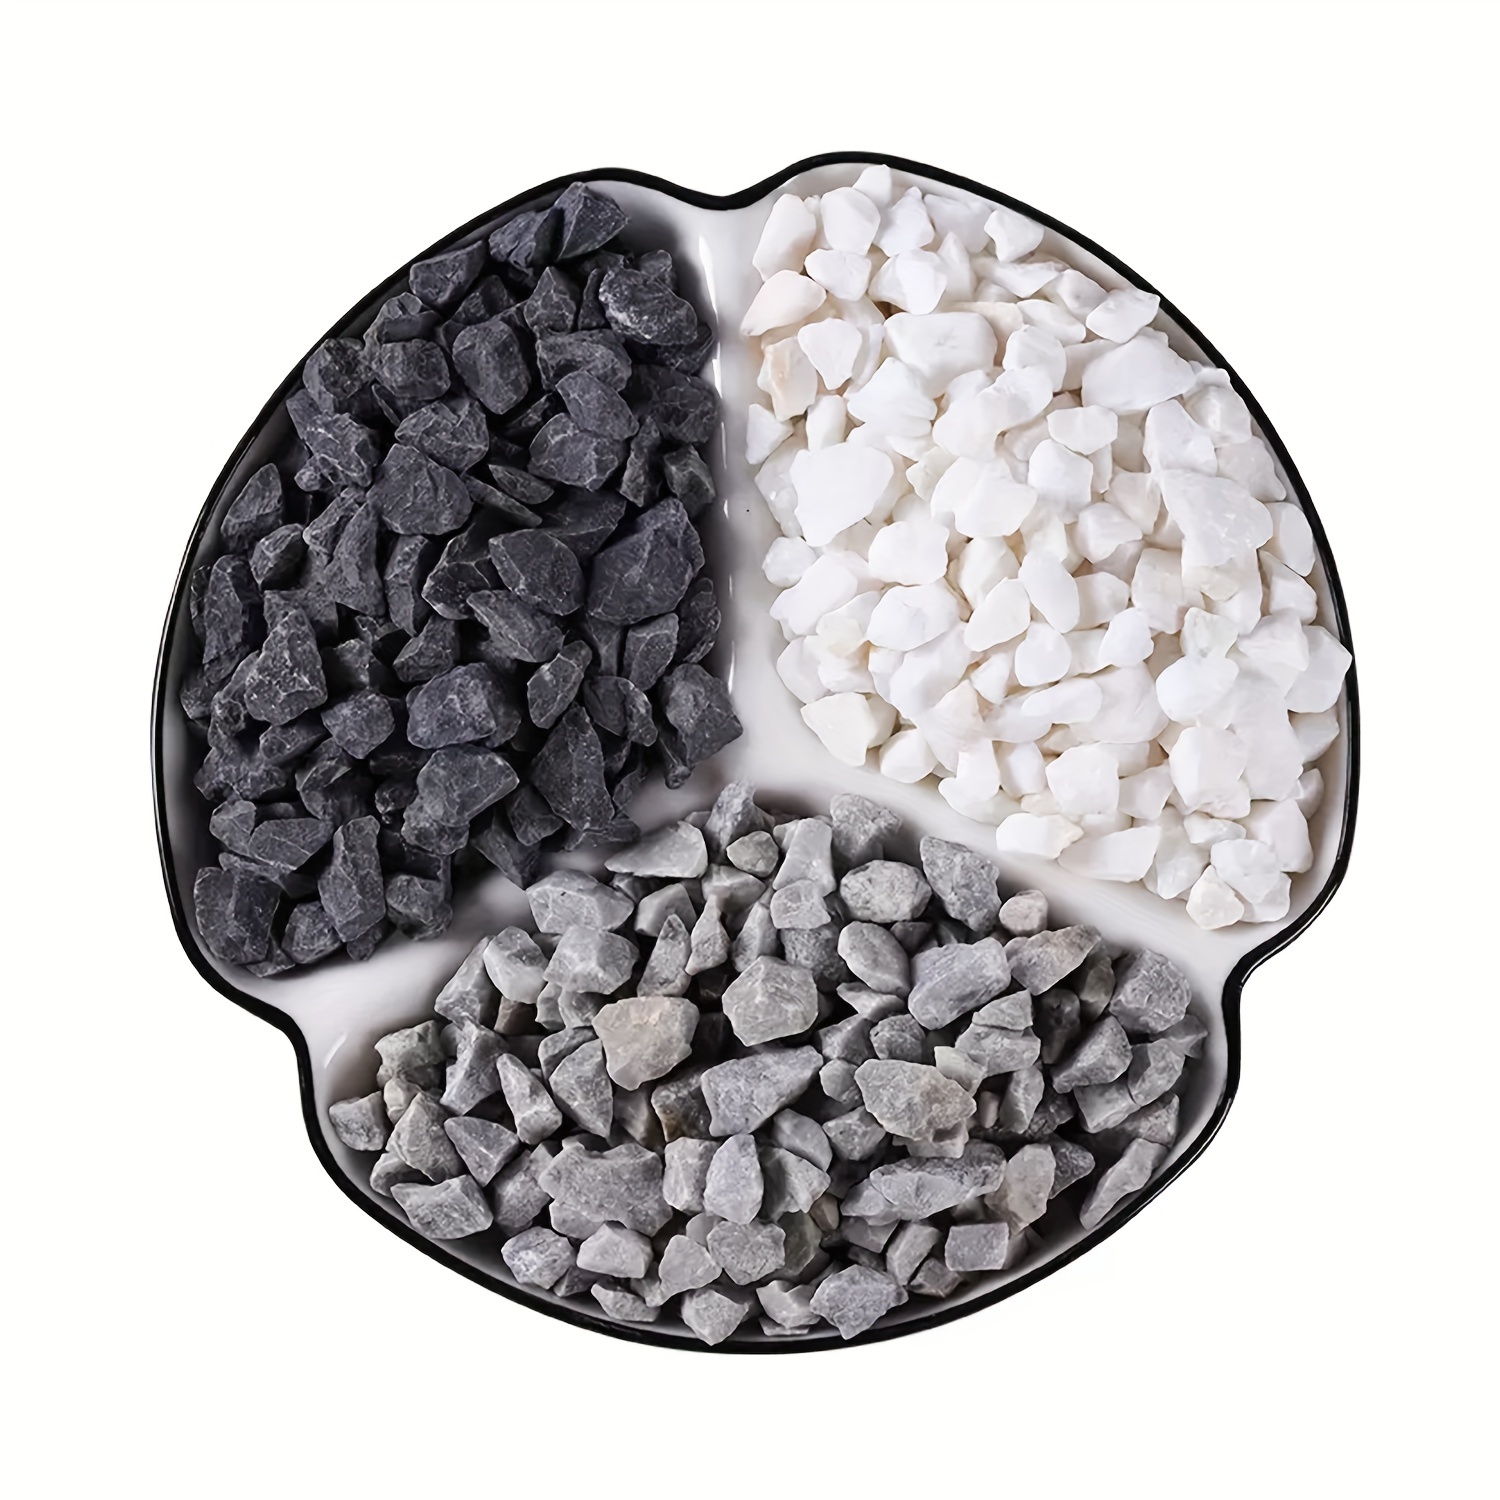 

Decorative Stones For Plant Pots - 100g, 500g, 1000g White And Gray Natural Stone Pebbles For Indoor Faux Plant Potting And Bonsai Gardens